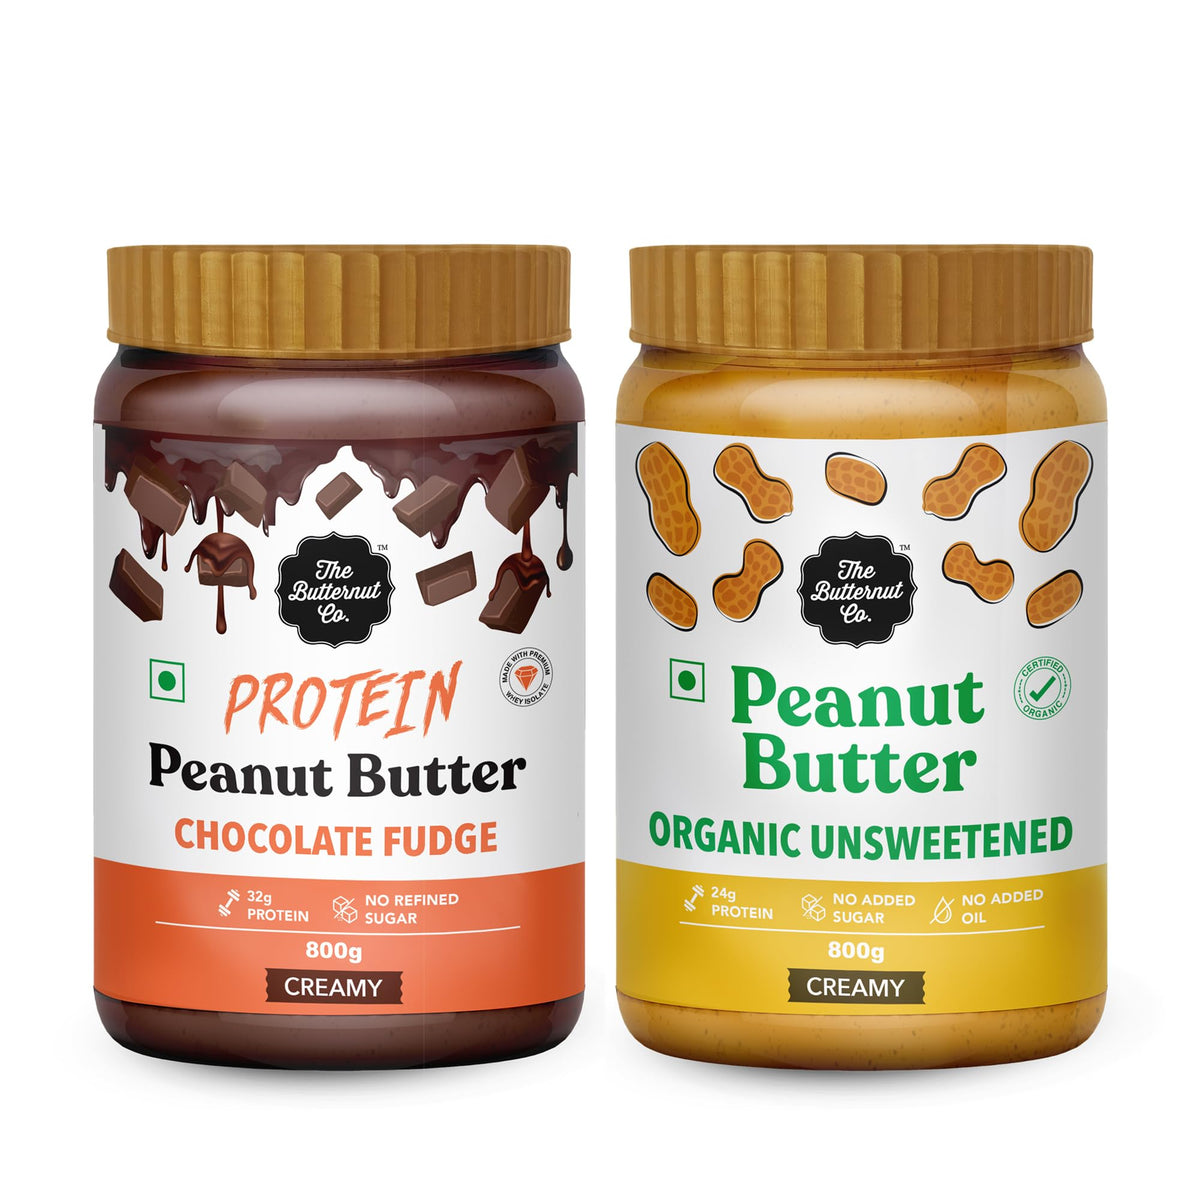 The Butternut Co. Protein Chocolate Fudge Peanut Butter Creamy 800g & Organic Unsweetened Peanut Butter Creamy 800g - 1.6kg Combo Value Pack